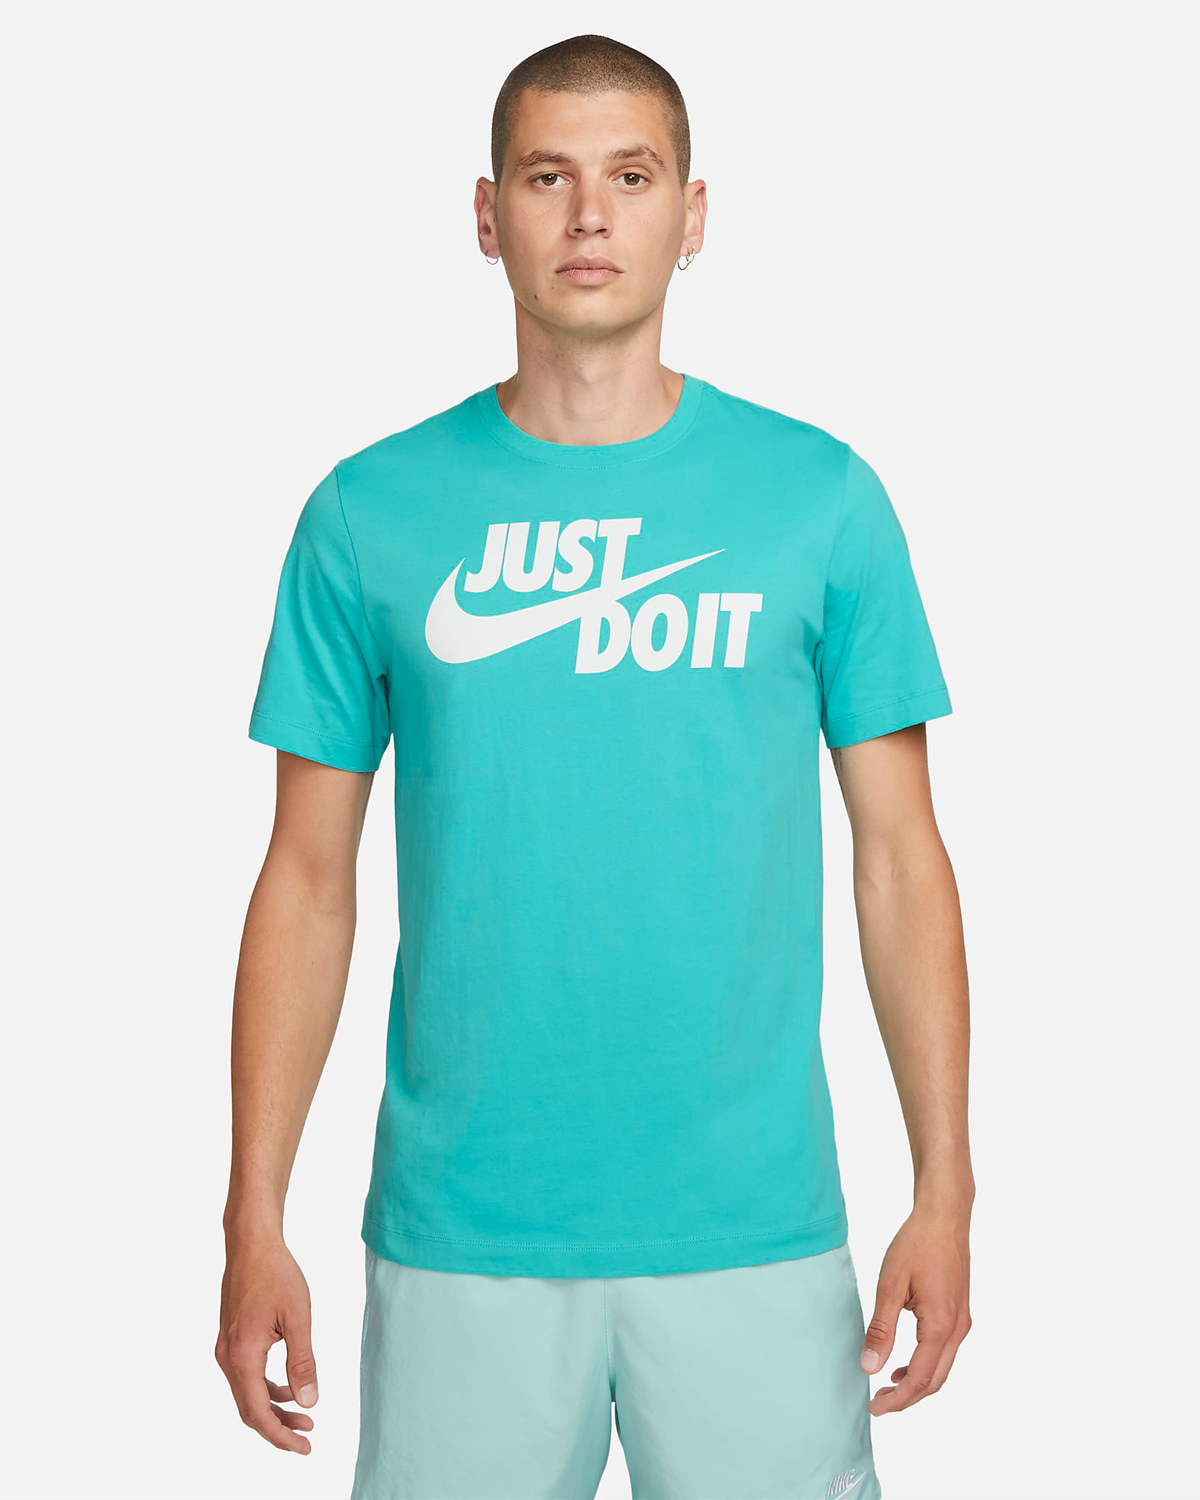 Nike Air Max 1 Clear Jade Shirts Clothing Outfits to Match